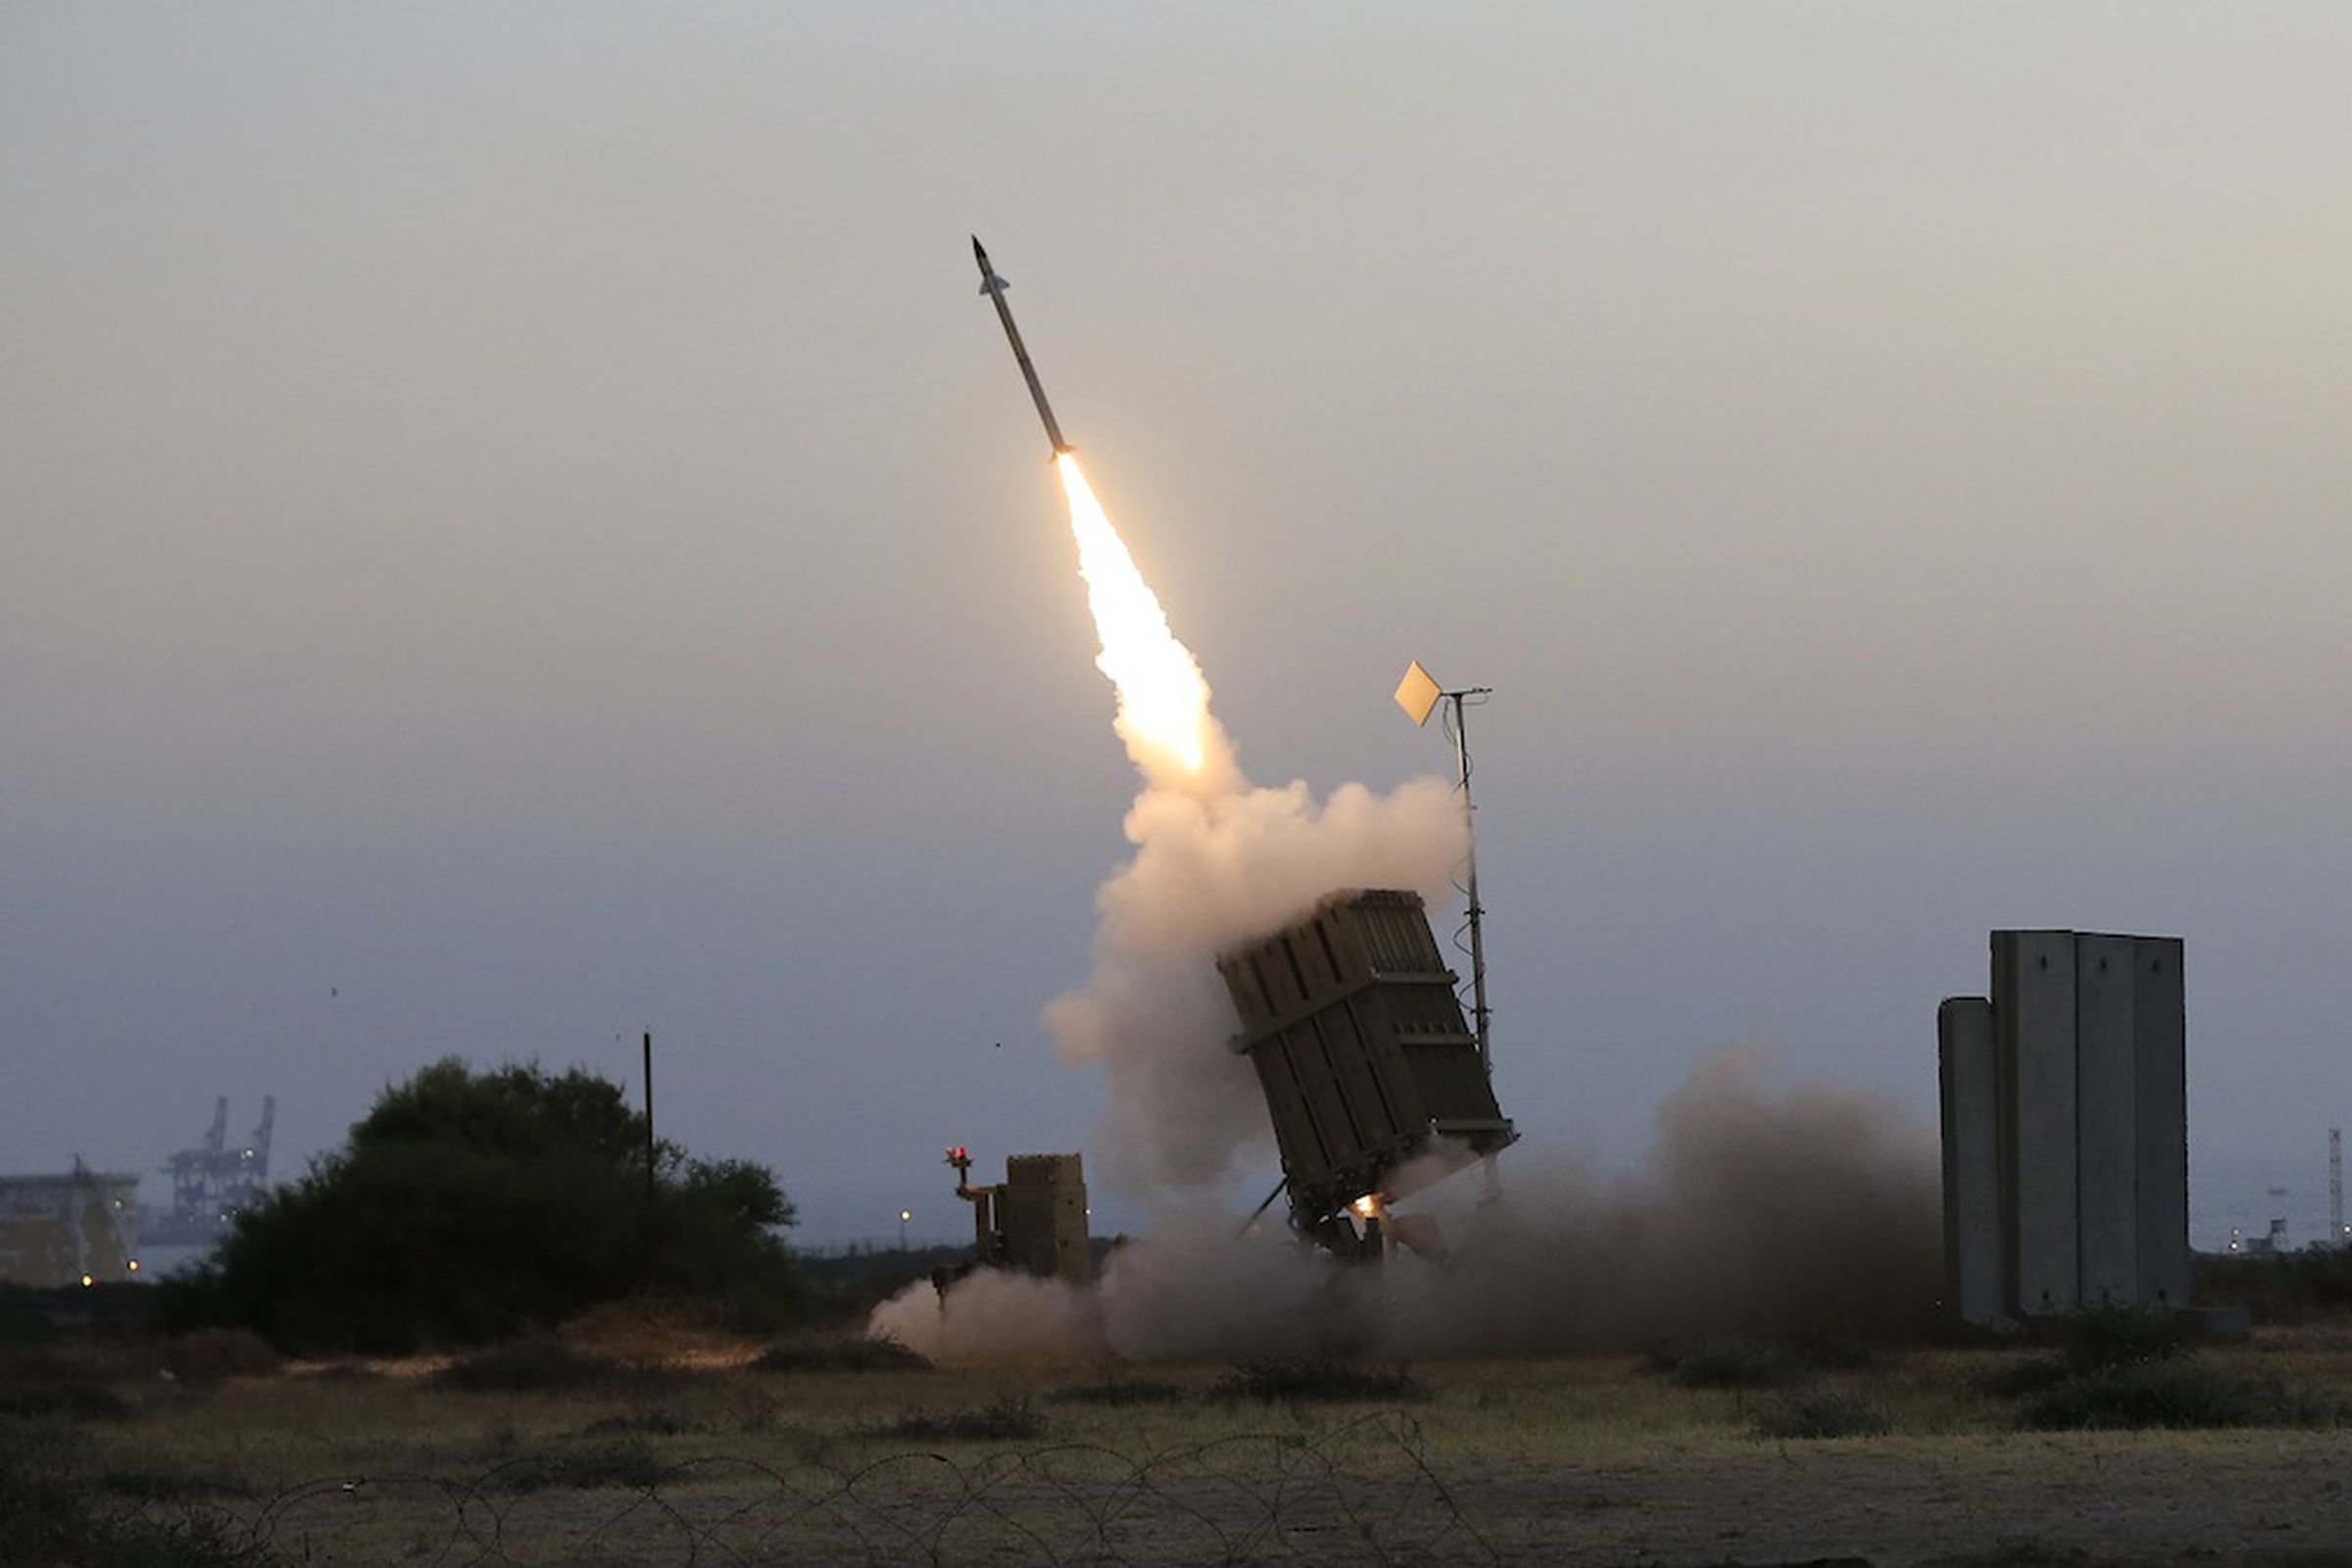 An Iron Dome missile defense system fires to intercept a rocket from Gaza